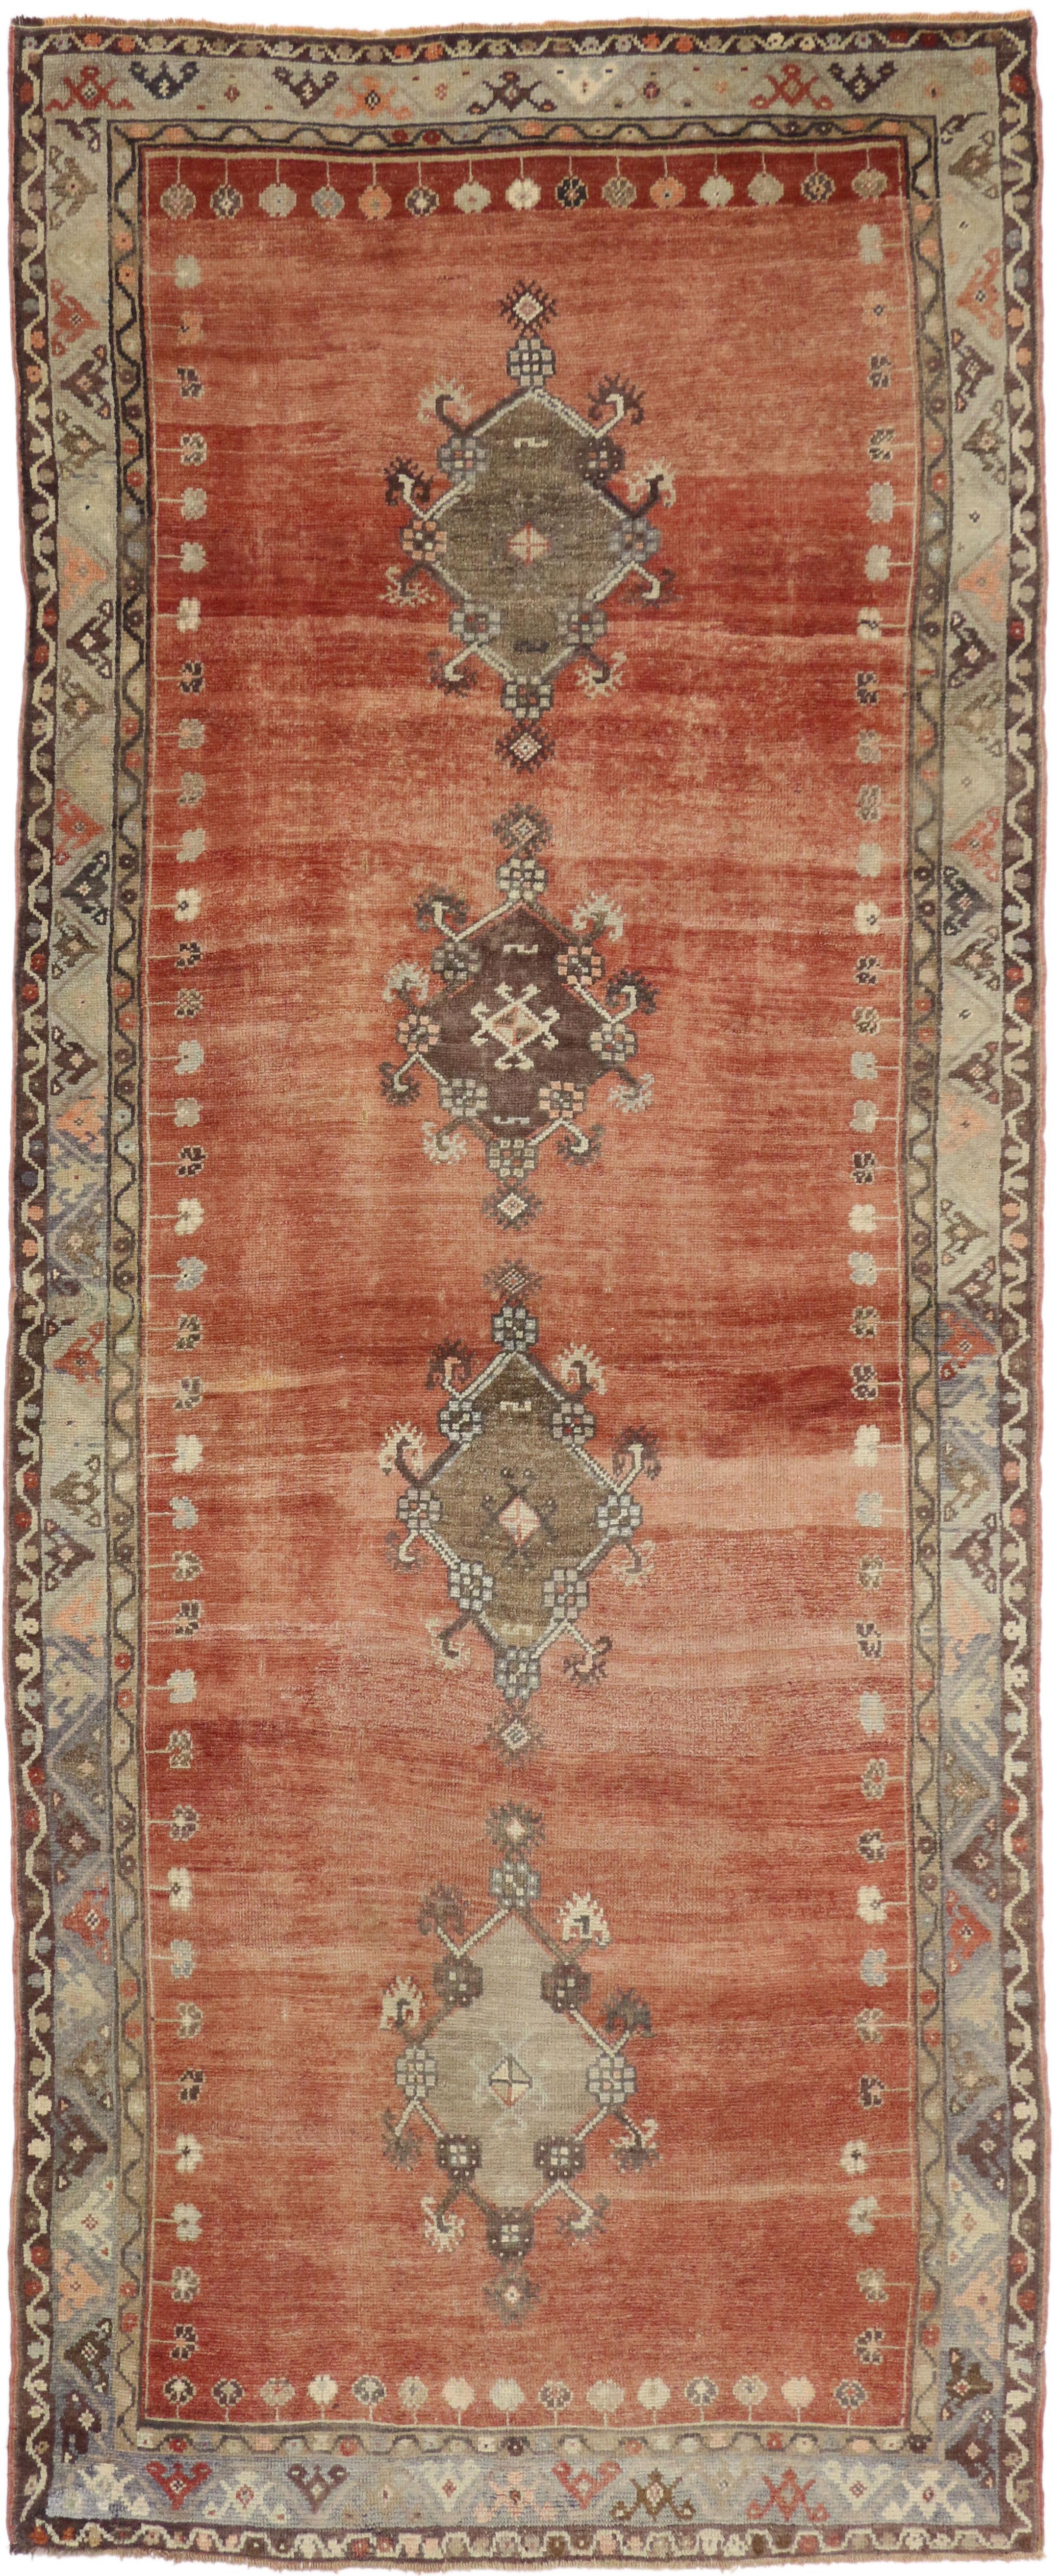 50768 Vintage Turkish Oushak Gallery Rug with Mid-Century Modern Style 04'05 x 10'10. Featuring four 